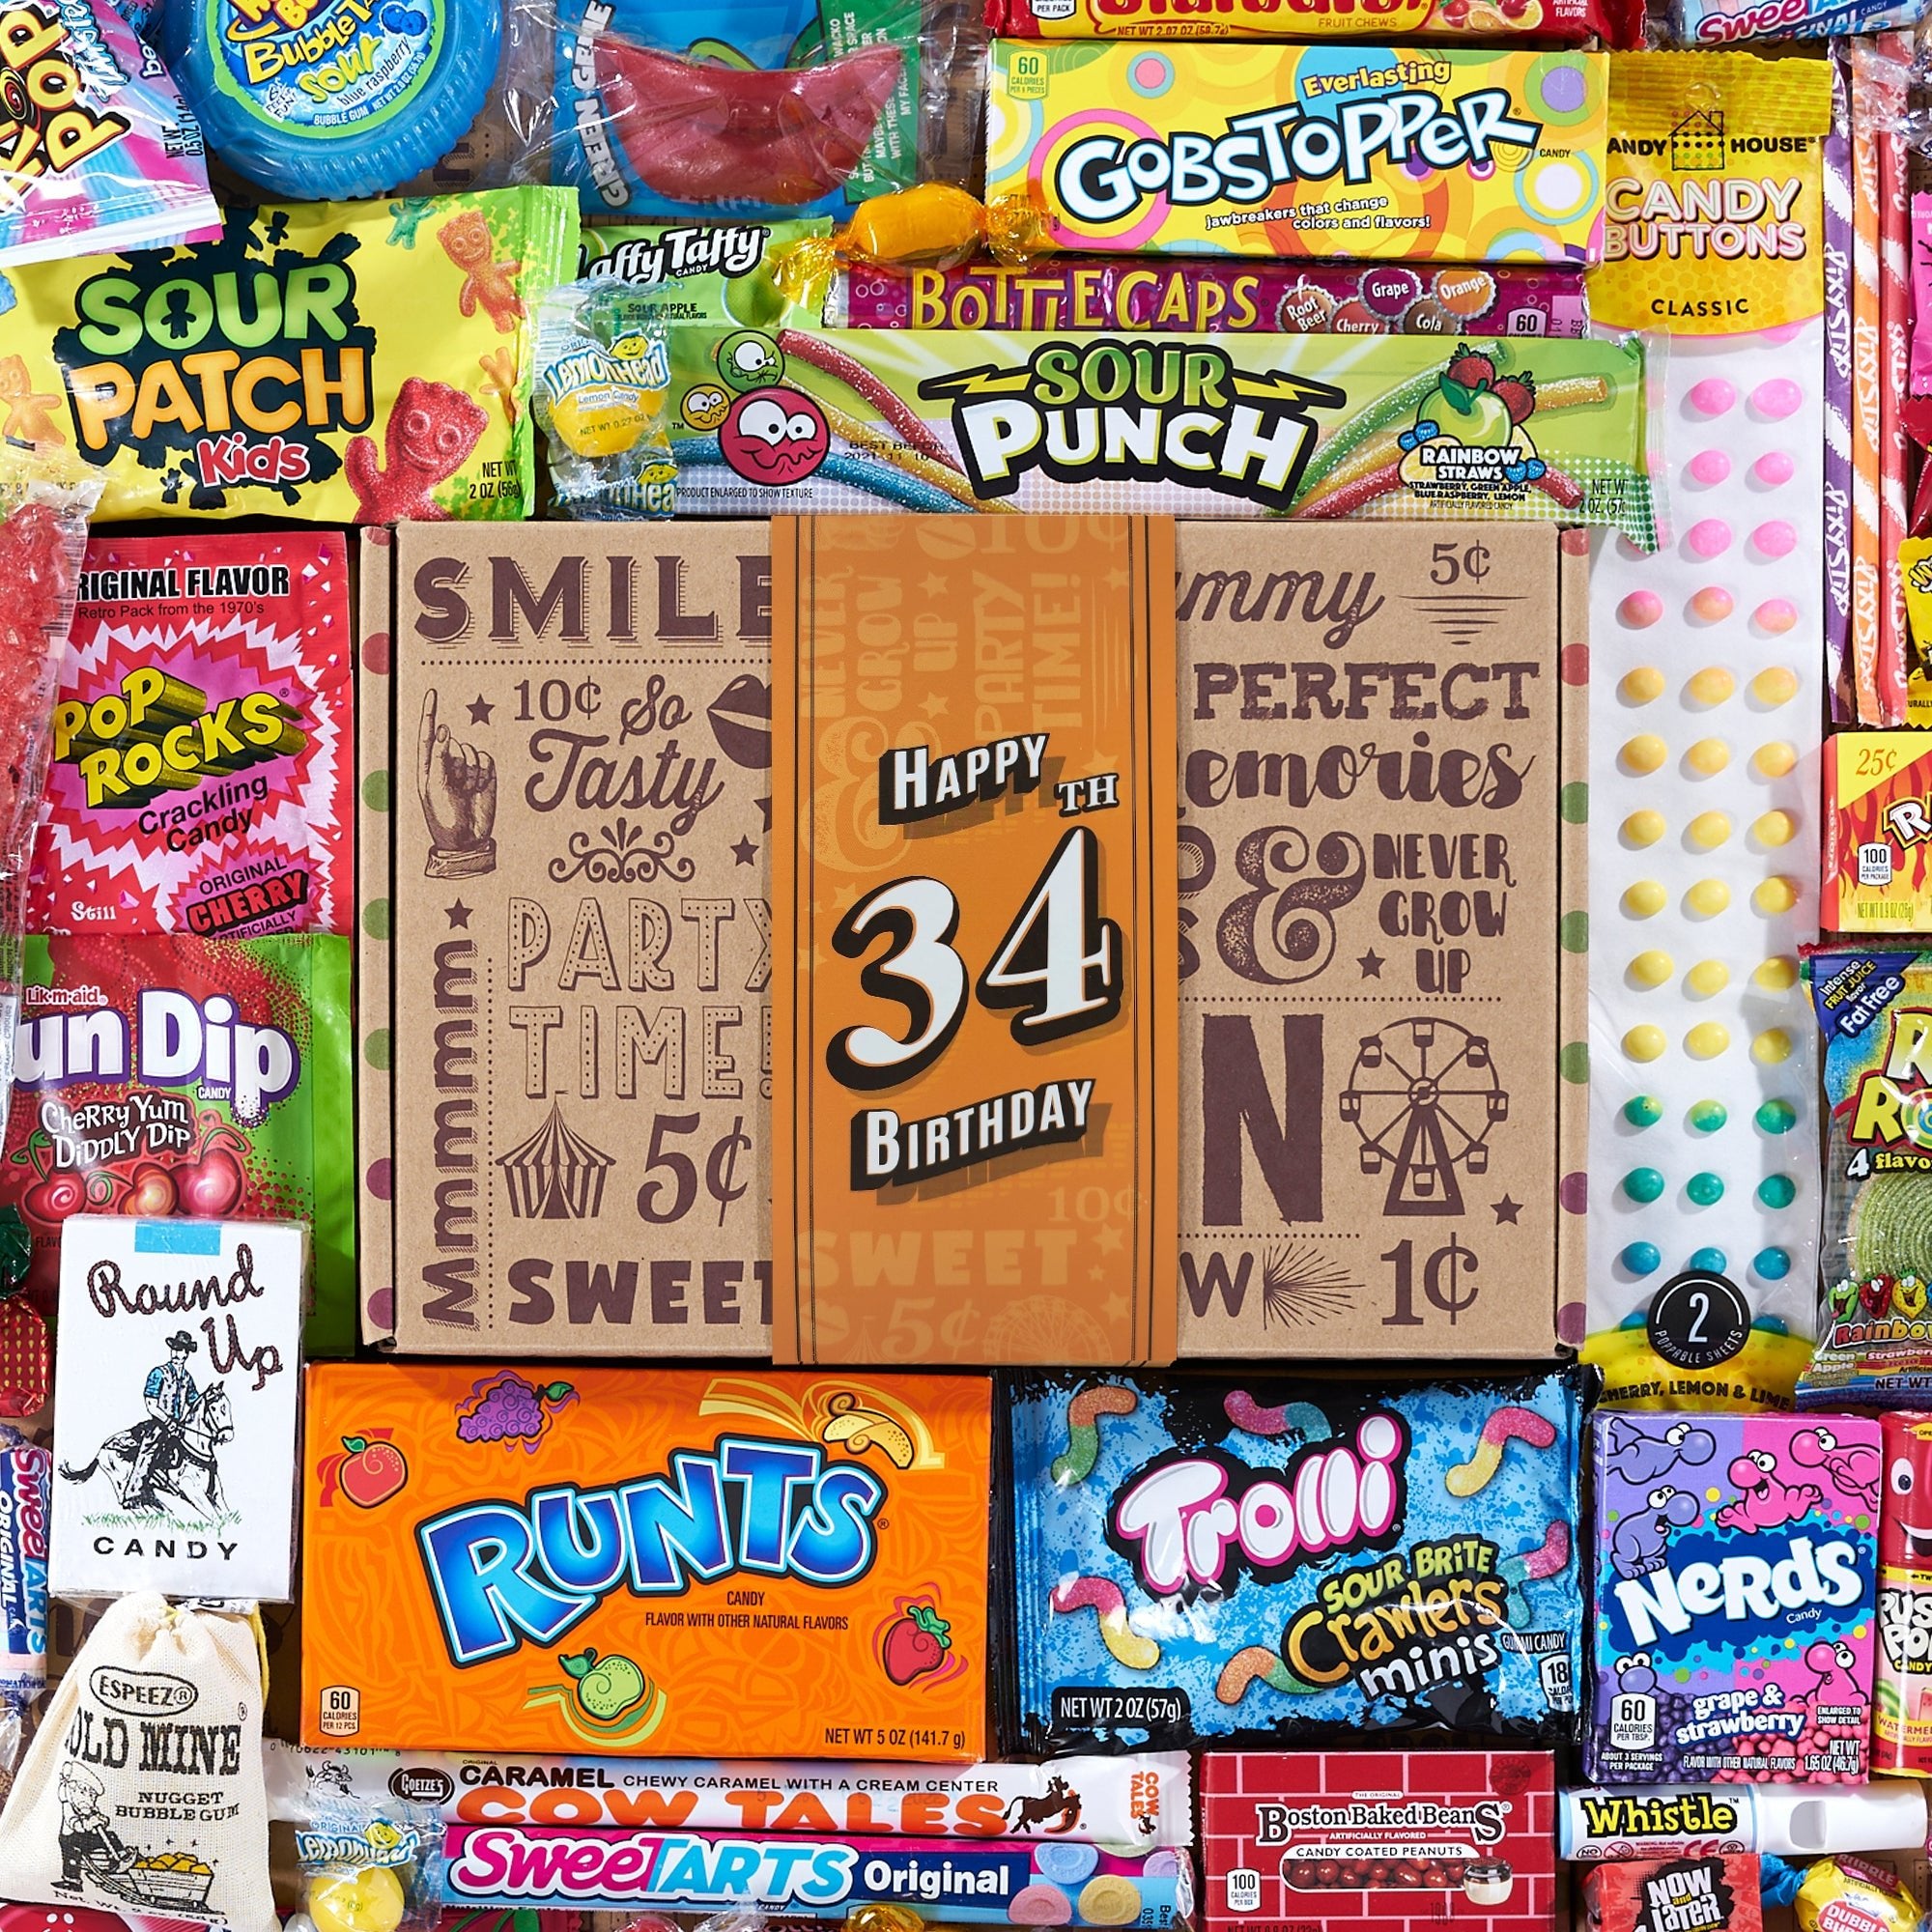 34th Birthday Retro Candy Gift - Vintage Candy Co.